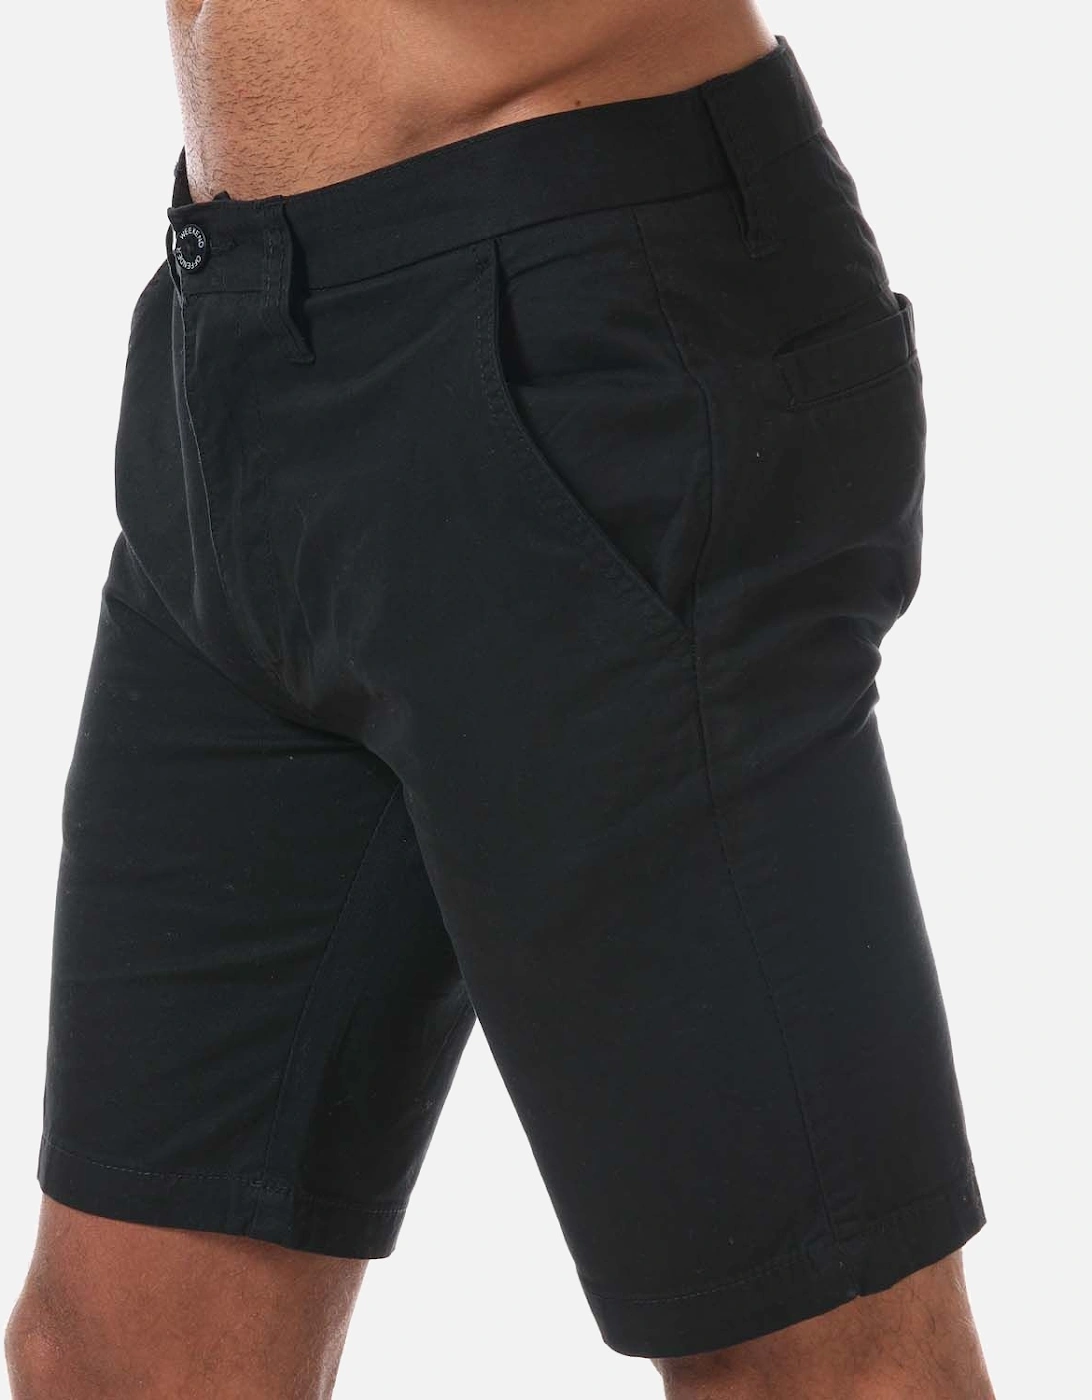 Men's Mens Dillenger Cotton Twill Chino Shorts - Black product